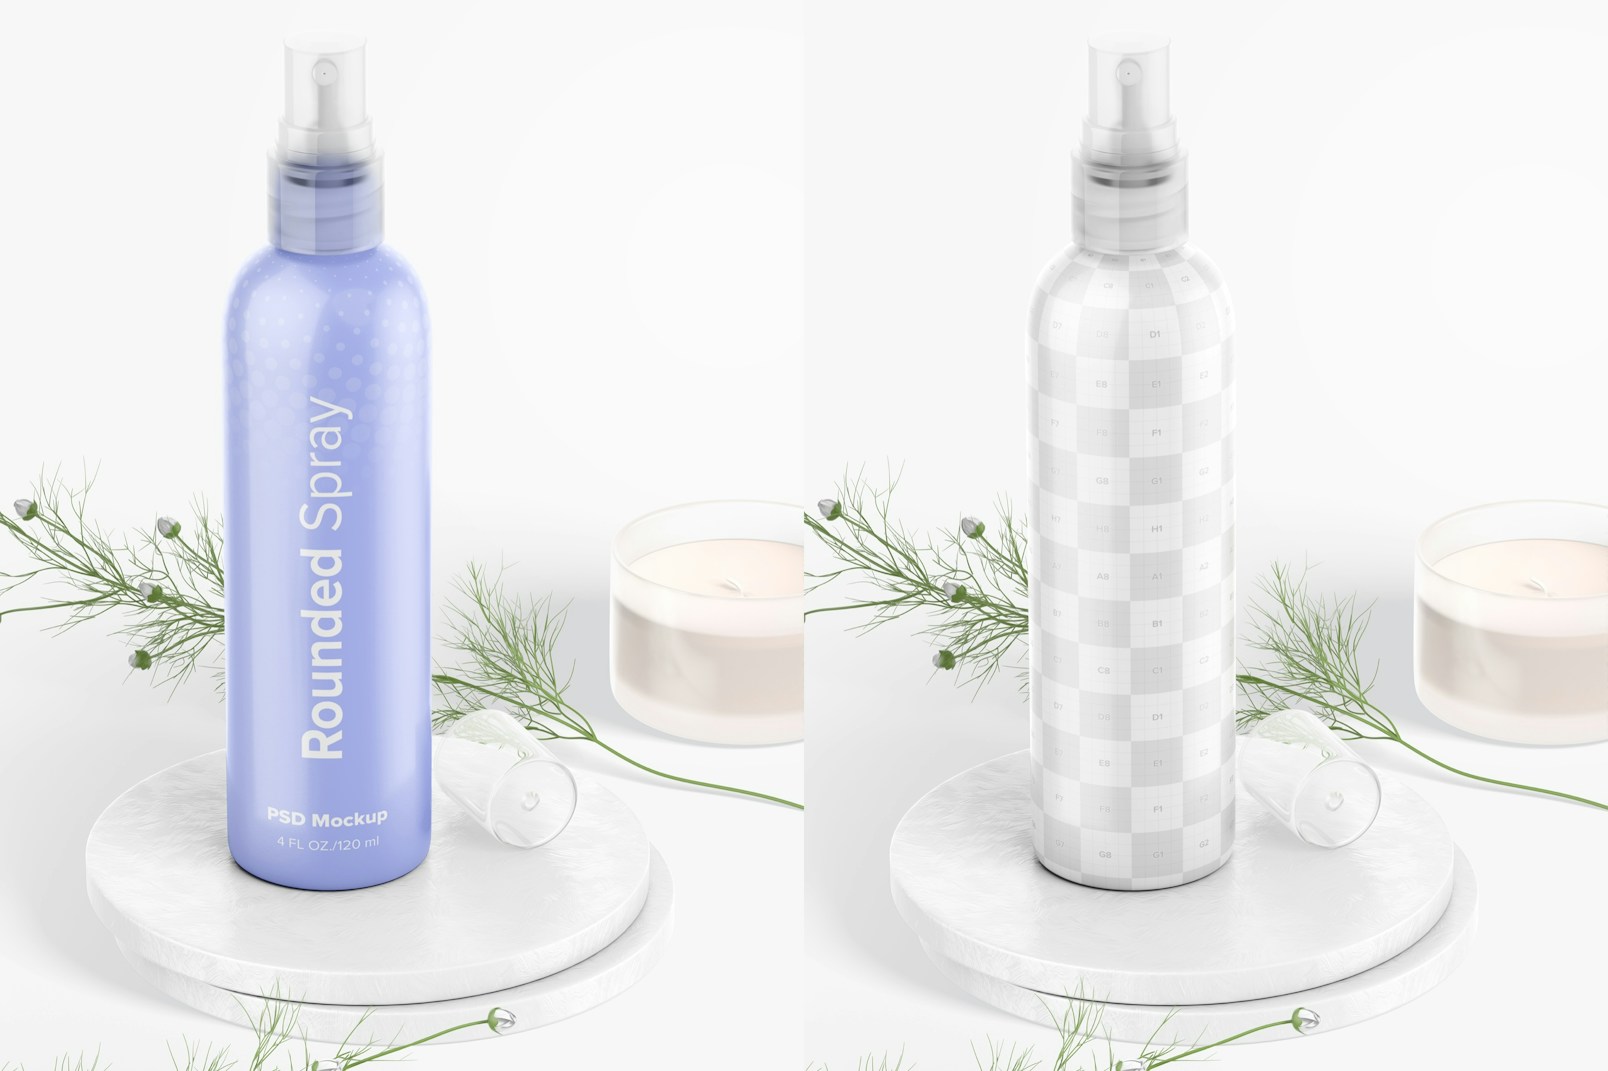 4 oz Rounded Spray Mockup, Perspective View